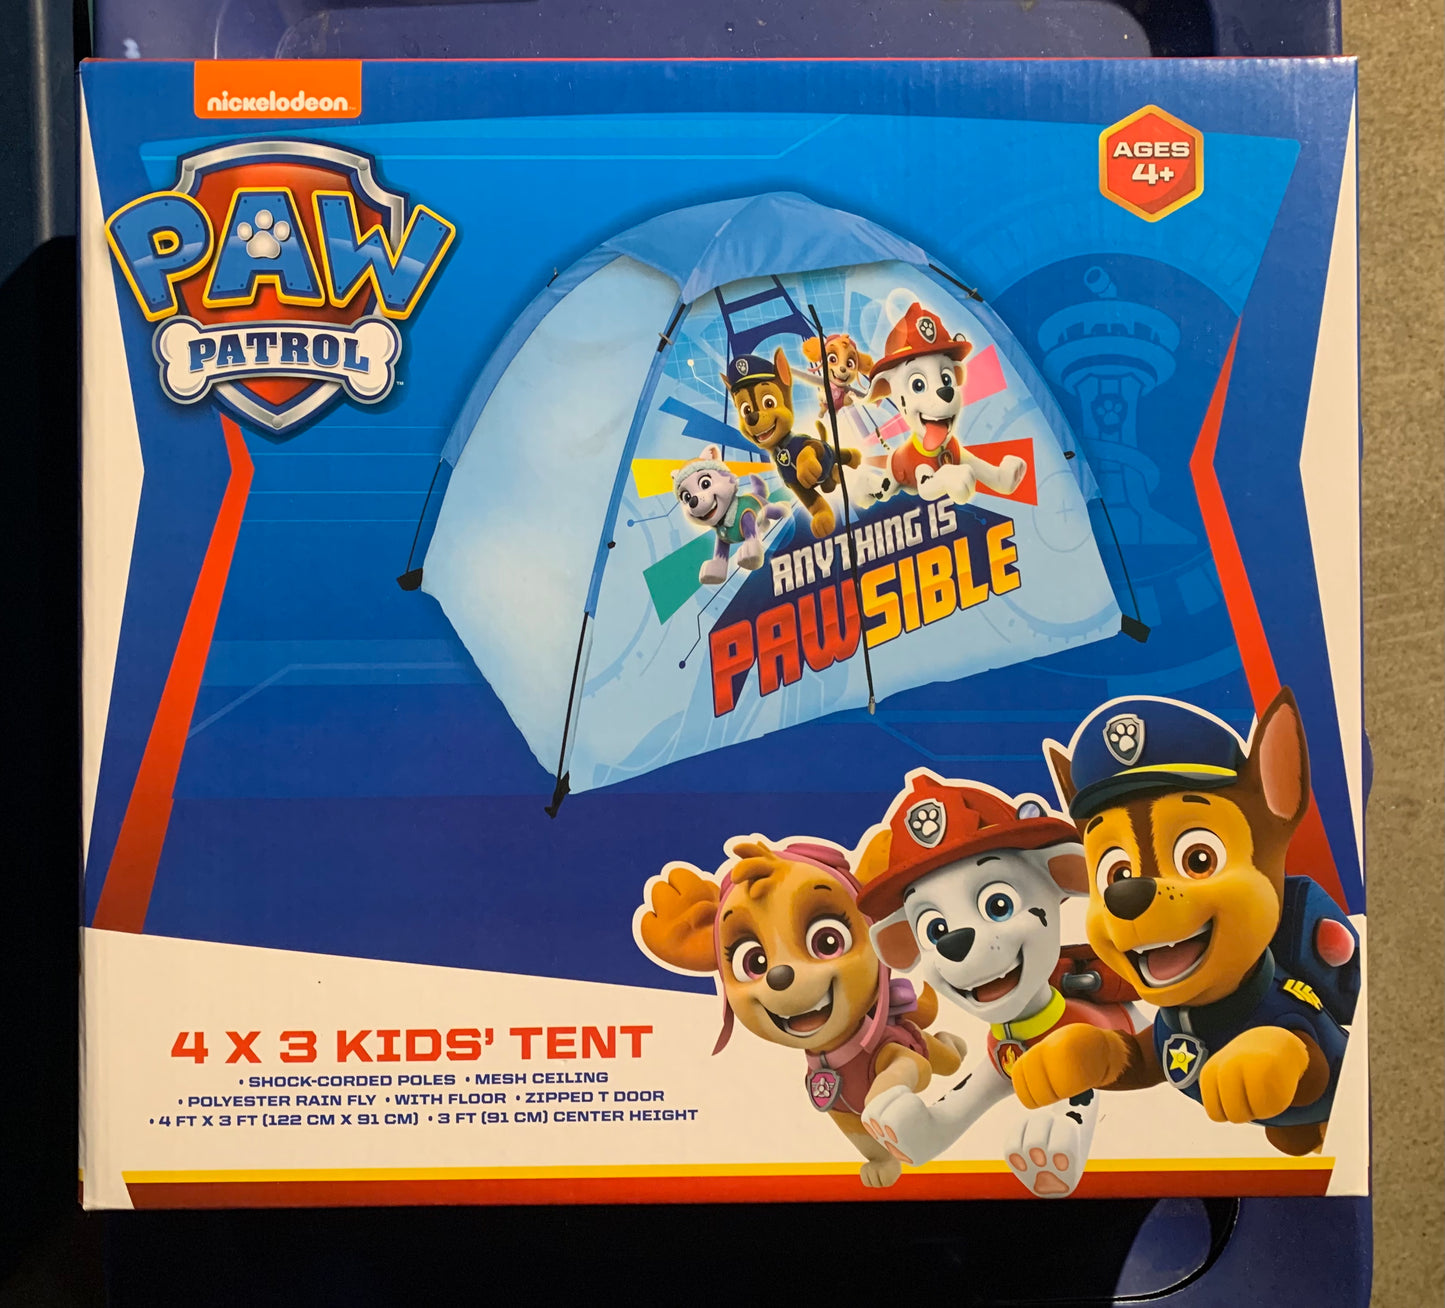 Paw Patrol Anything is Pawsible 4x3 Kids’ Tent 13630